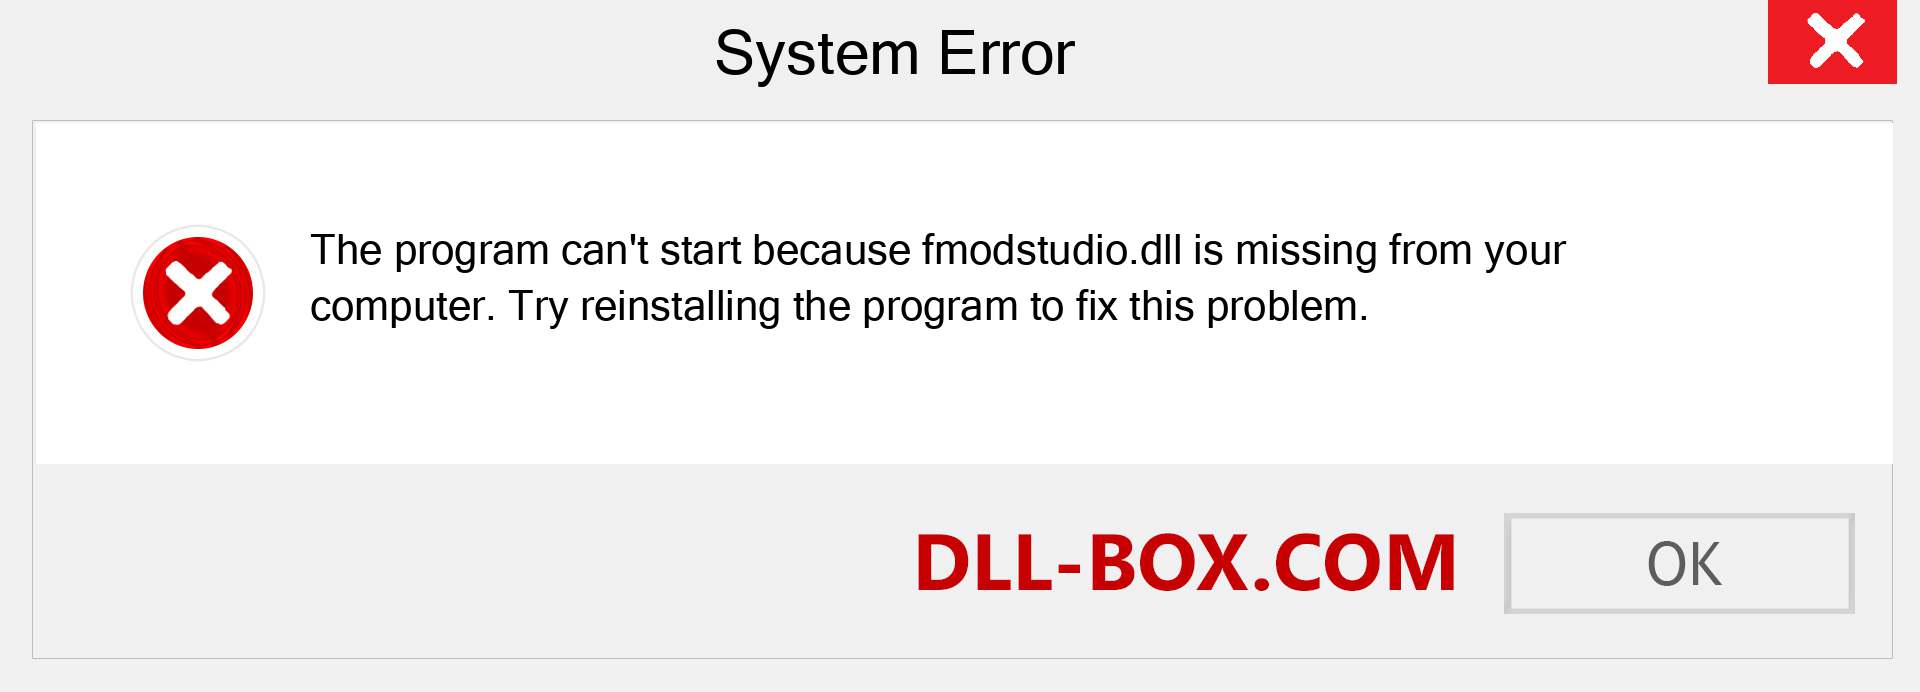  fmodstudio.dll file is missing?. Download for Windows 7, 8, 10 - Fix  fmodstudio dll Missing Error on Windows, photos, images